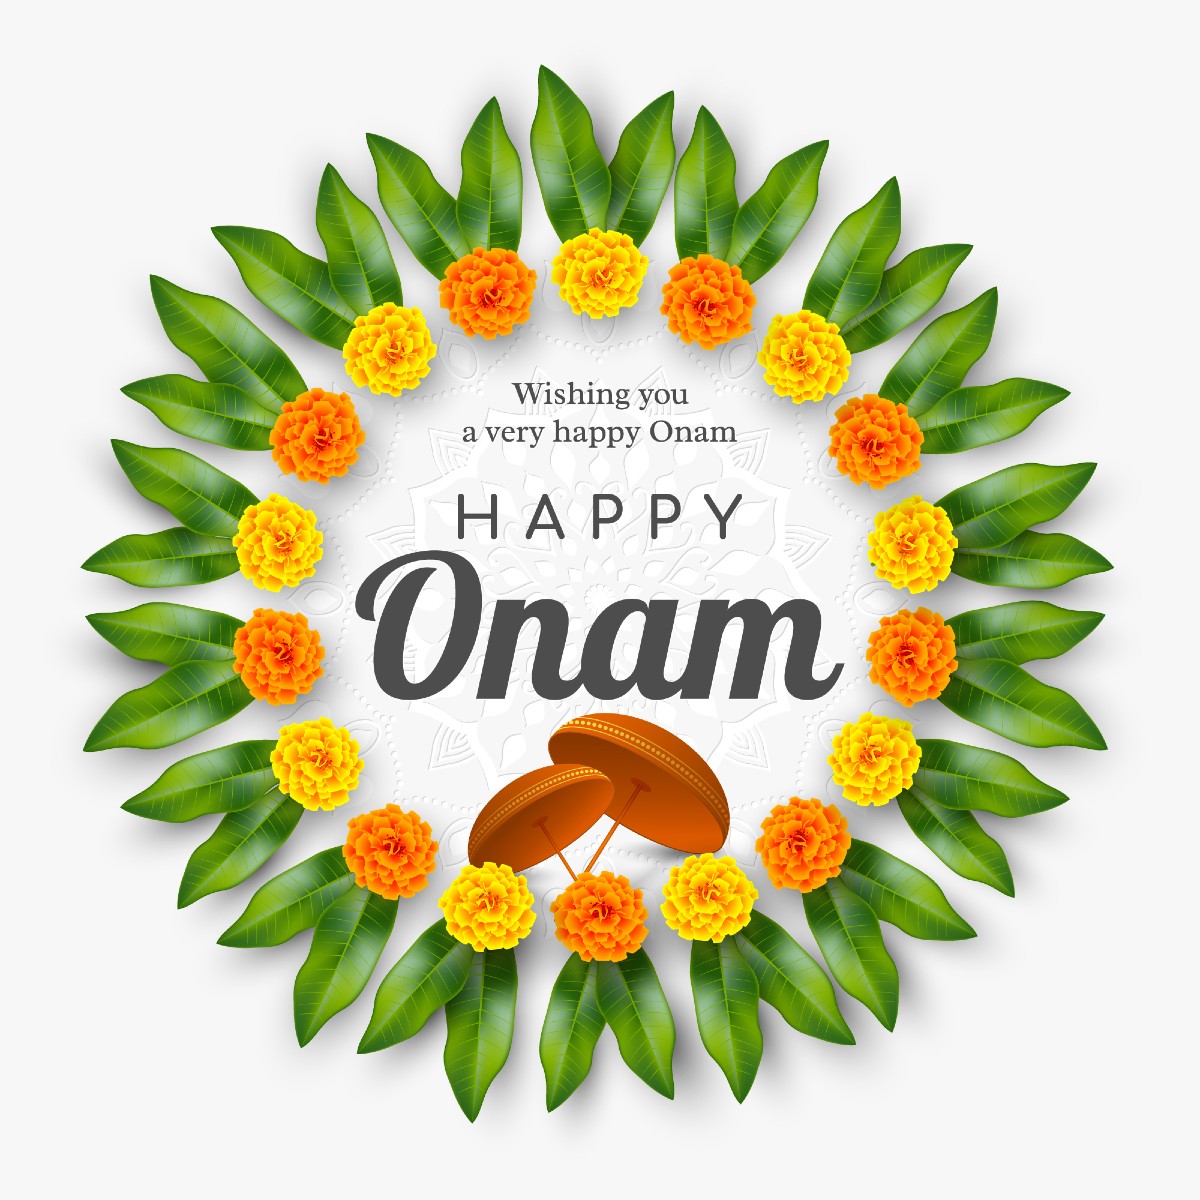 Happy Onam 2021 Images, Wishes, Quotes, Messages and WhatsApp